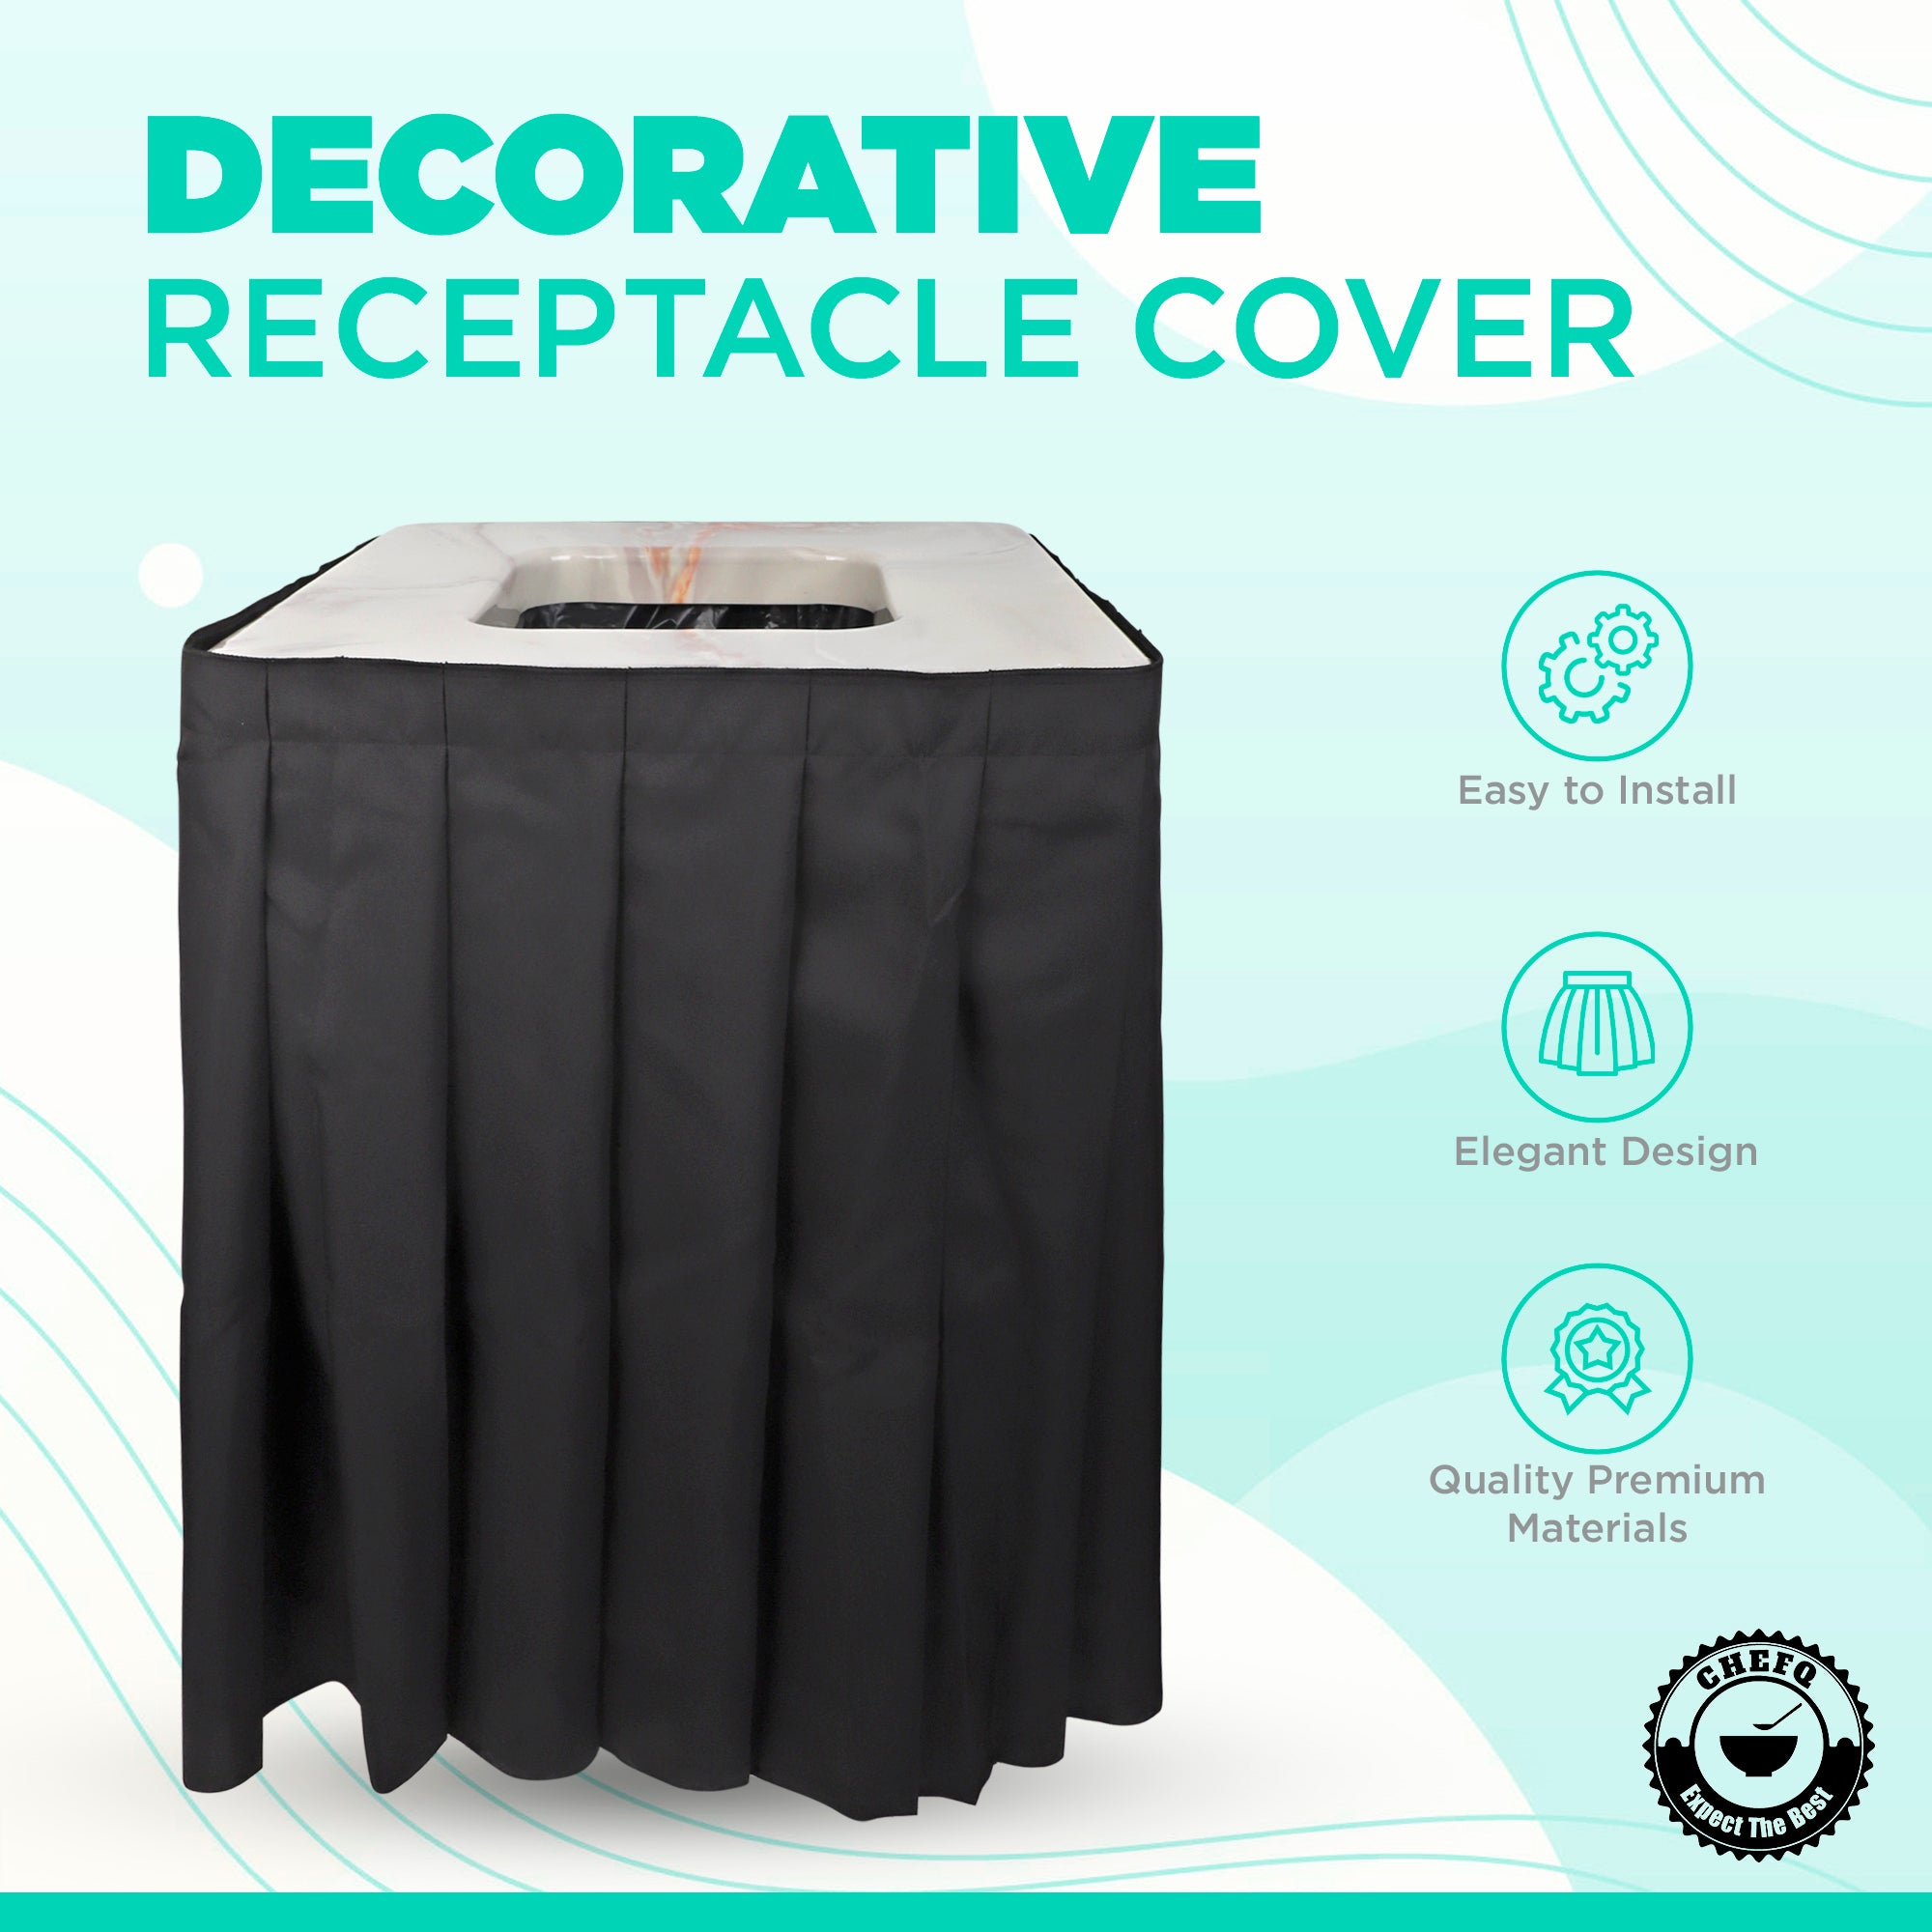 Square Black Garbage Can Cover - Solid Pleated Skirt Topper for 32-35 Gallon Indoor Garbage Cans Trash Bins, Waste Container Without Wheels - Ideal for Birthday Party, Events, Residential Use